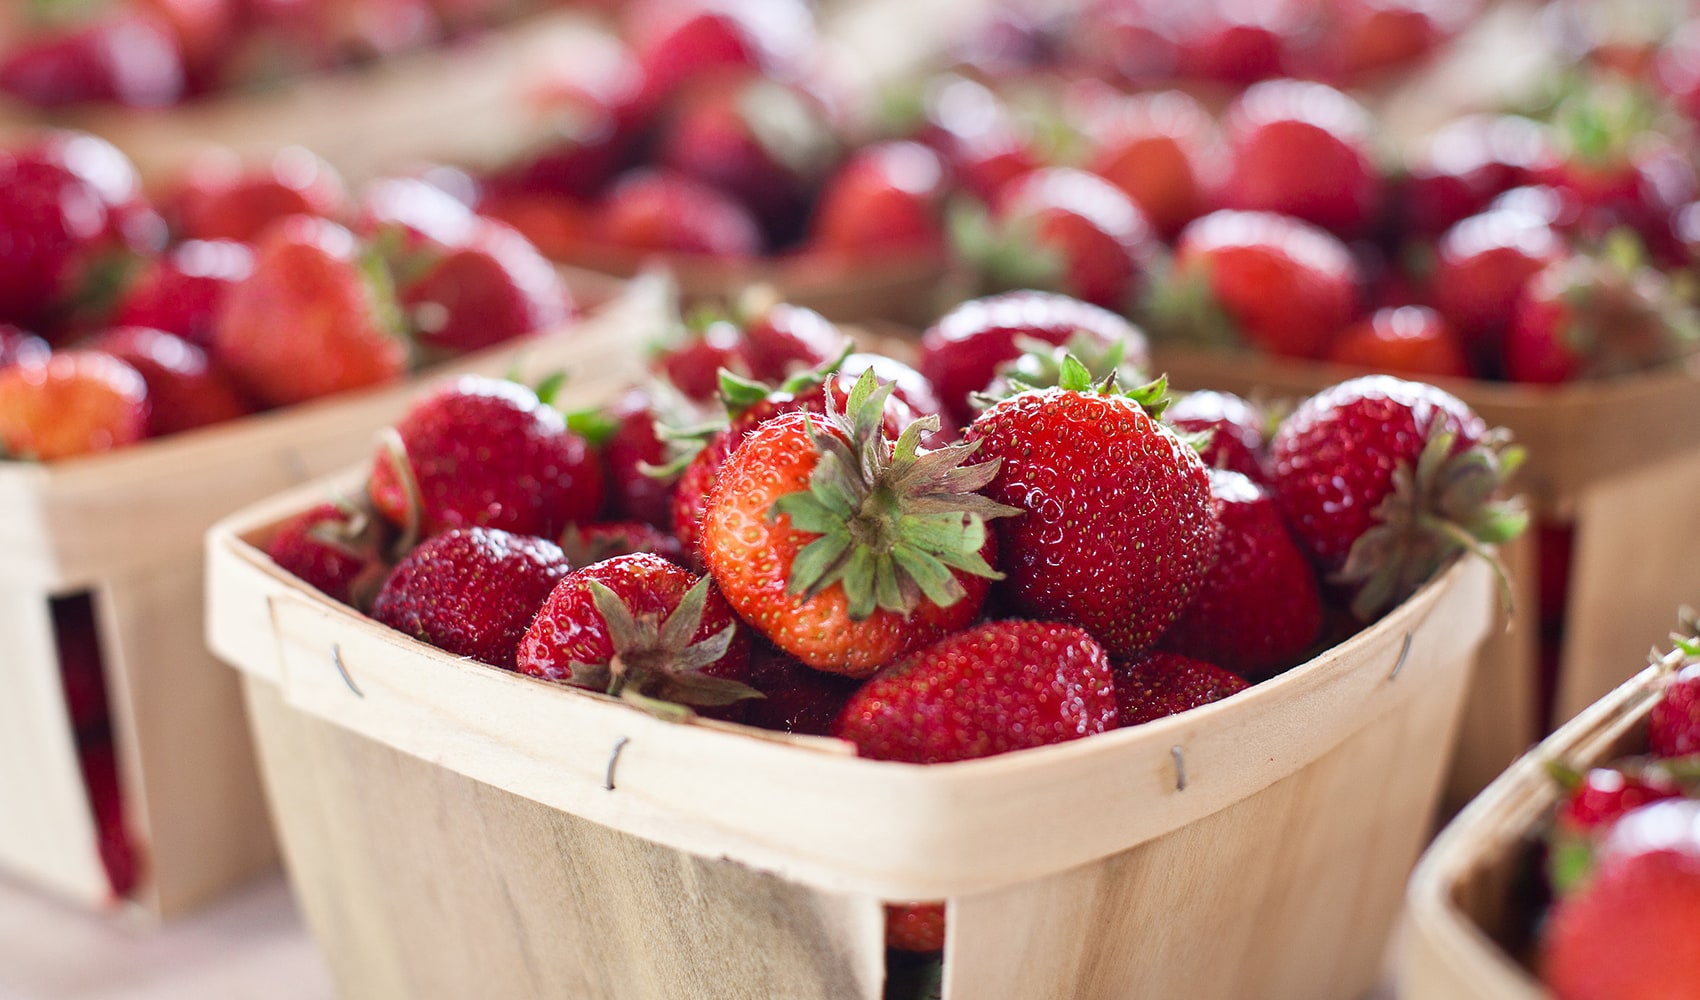 A farmers market table with baskets of red strawberries